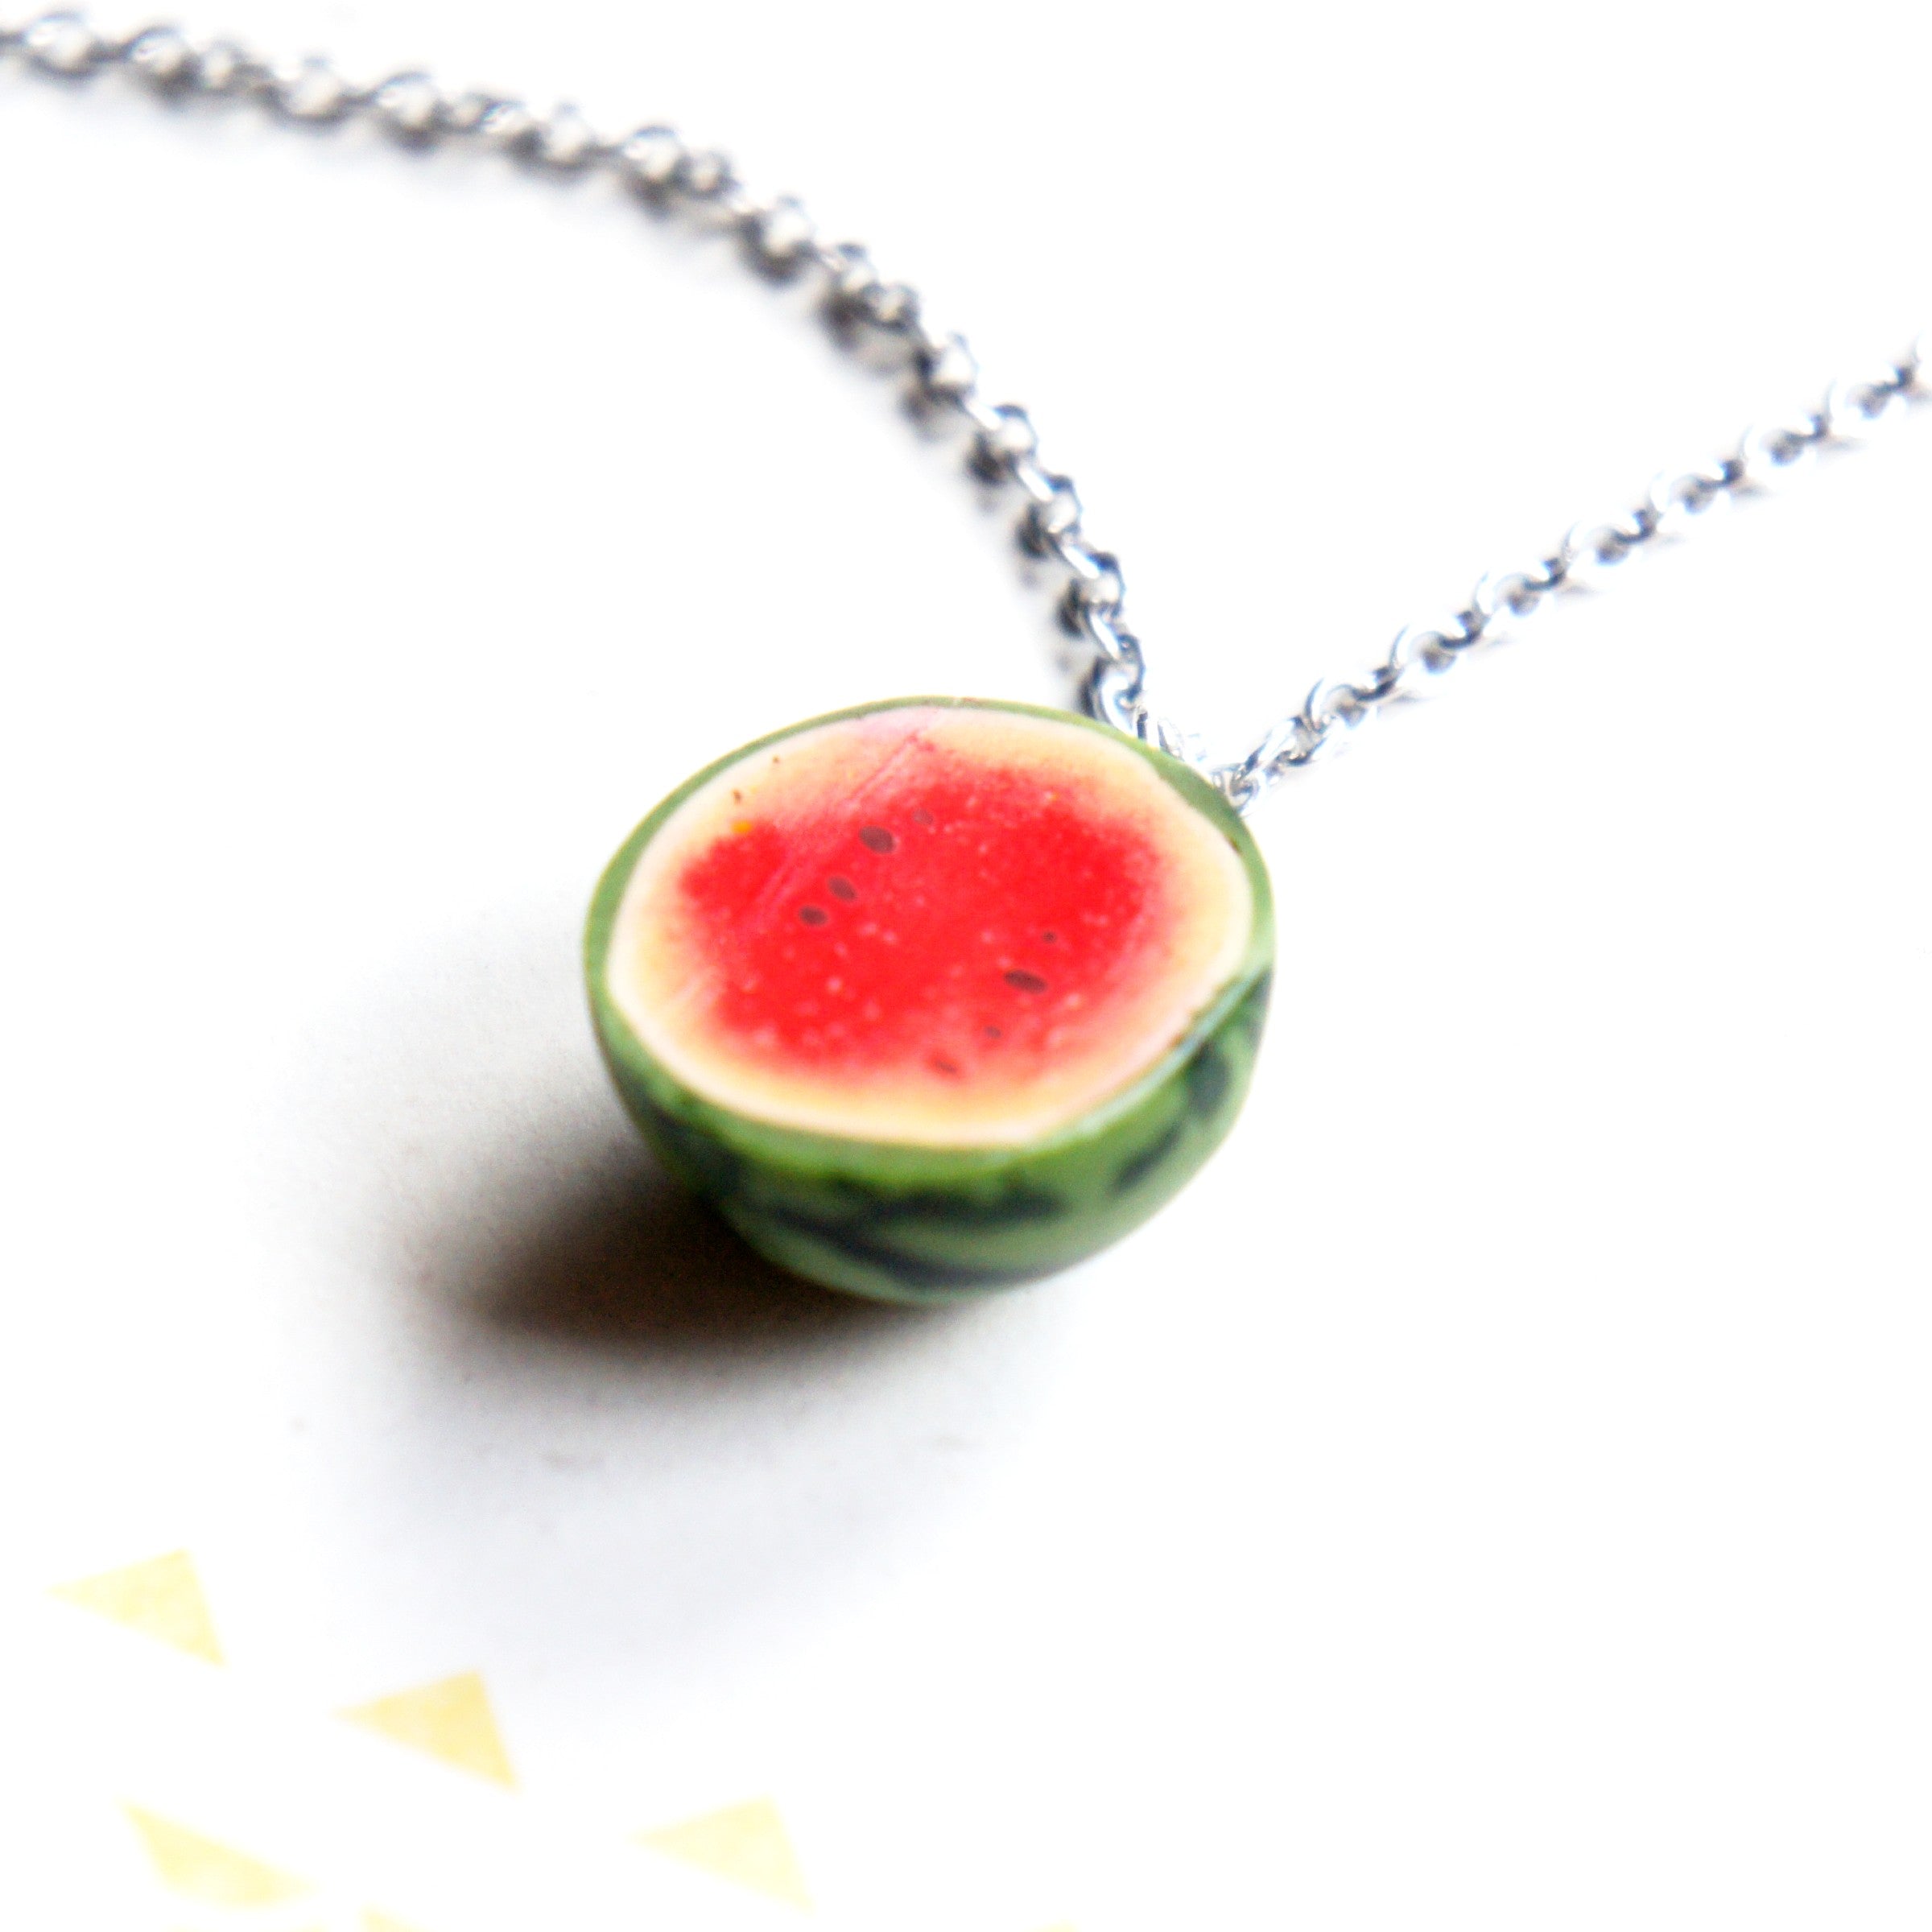 Watermelon Necklace - Jillicious charms and accessories